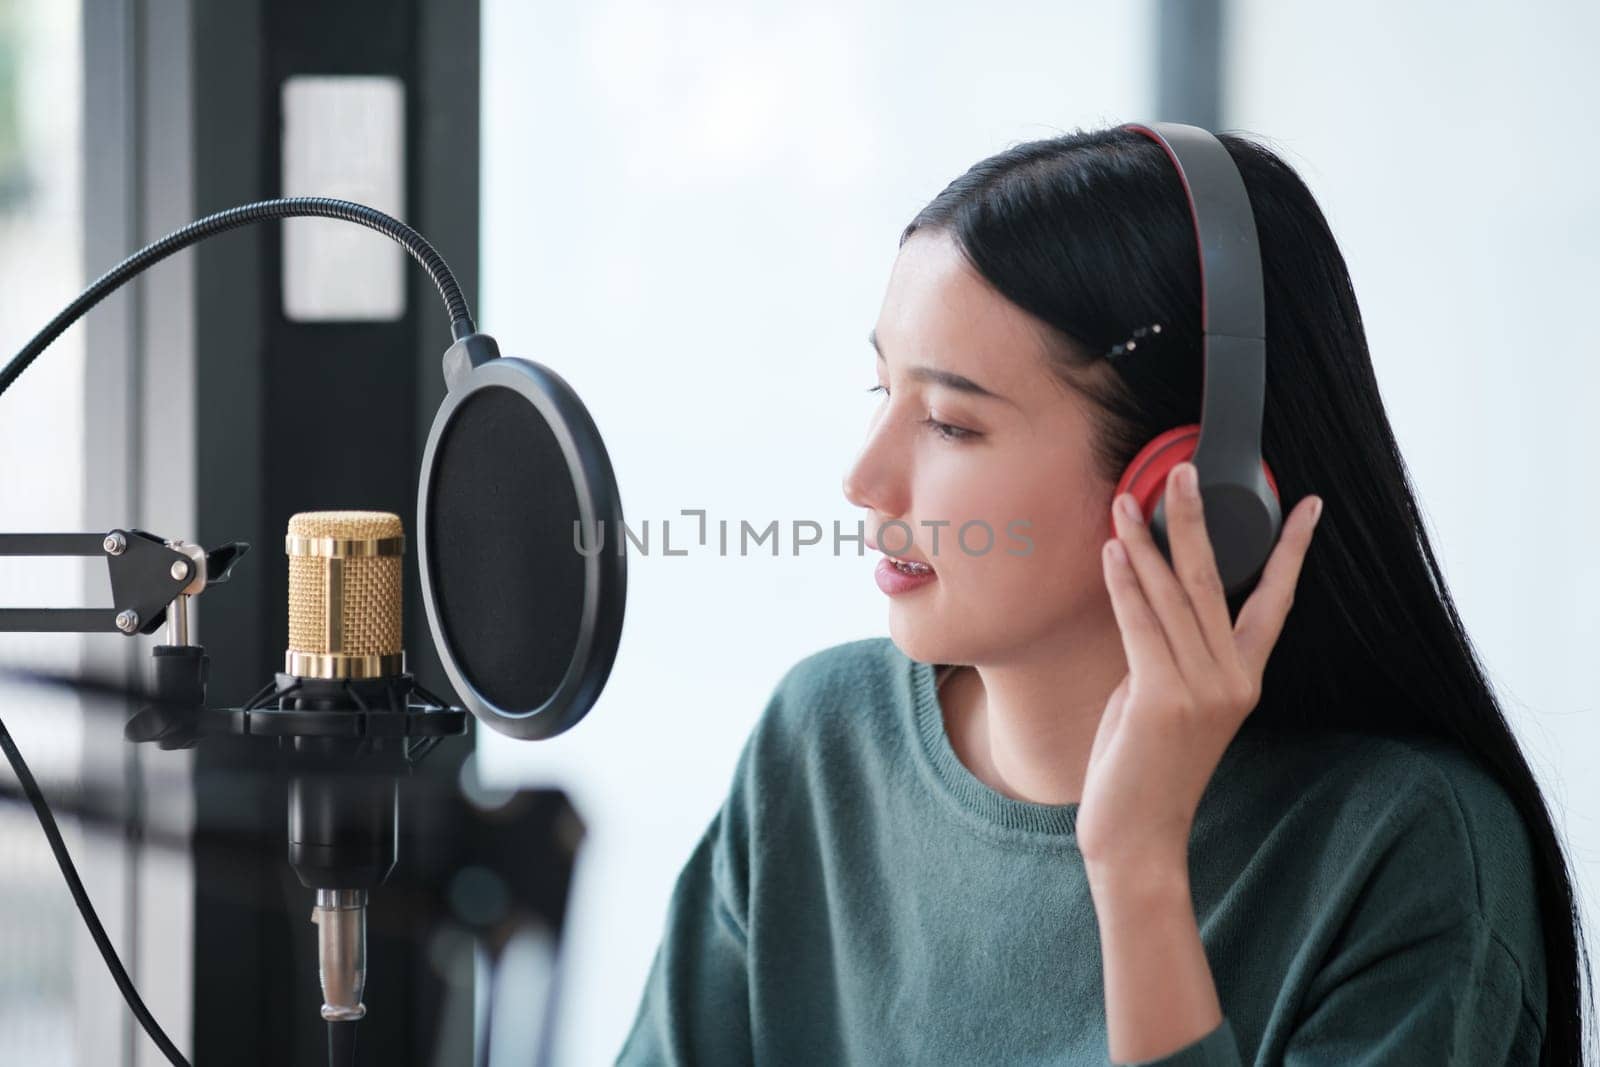 A woman is recording a song in a studio. She is wearing headphones and smiling. The studio is equipped with a microphone and a soundboard. The woman is enjoying the recording process